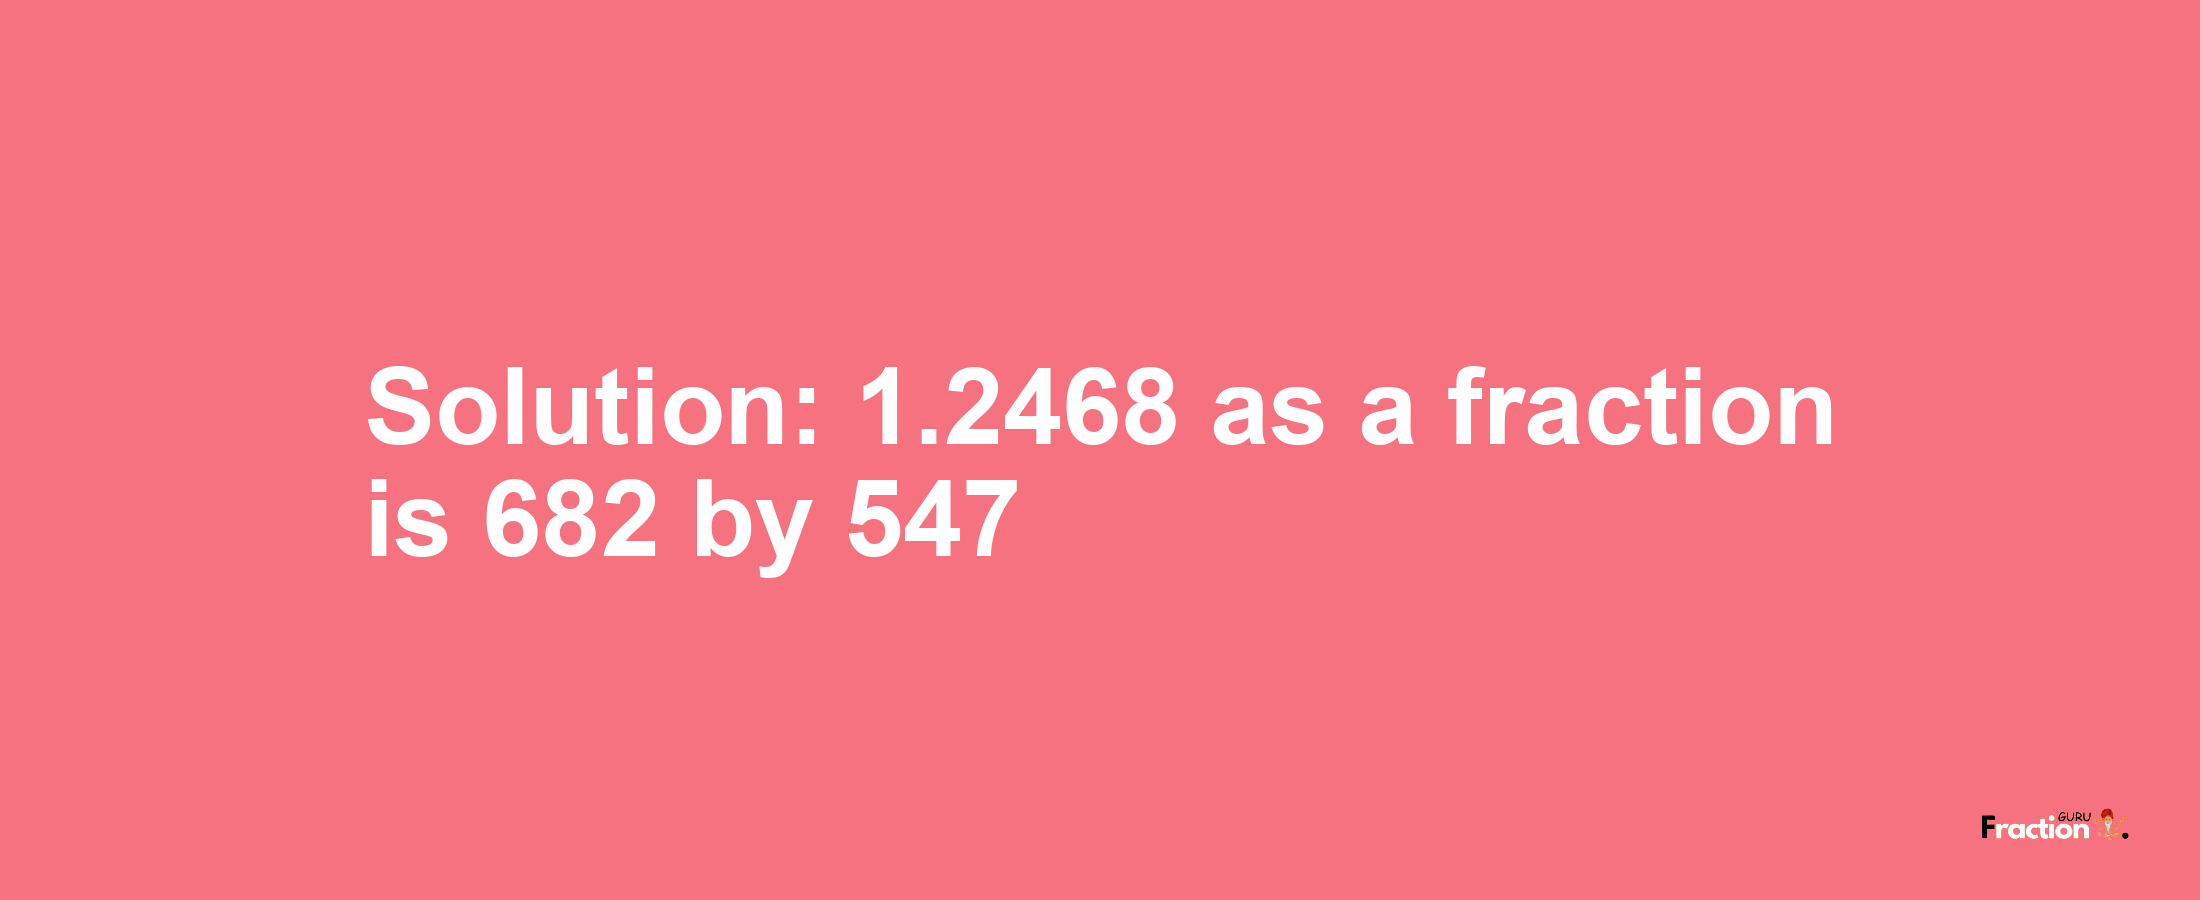 Solution:1.2468 as a fraction is 682/547